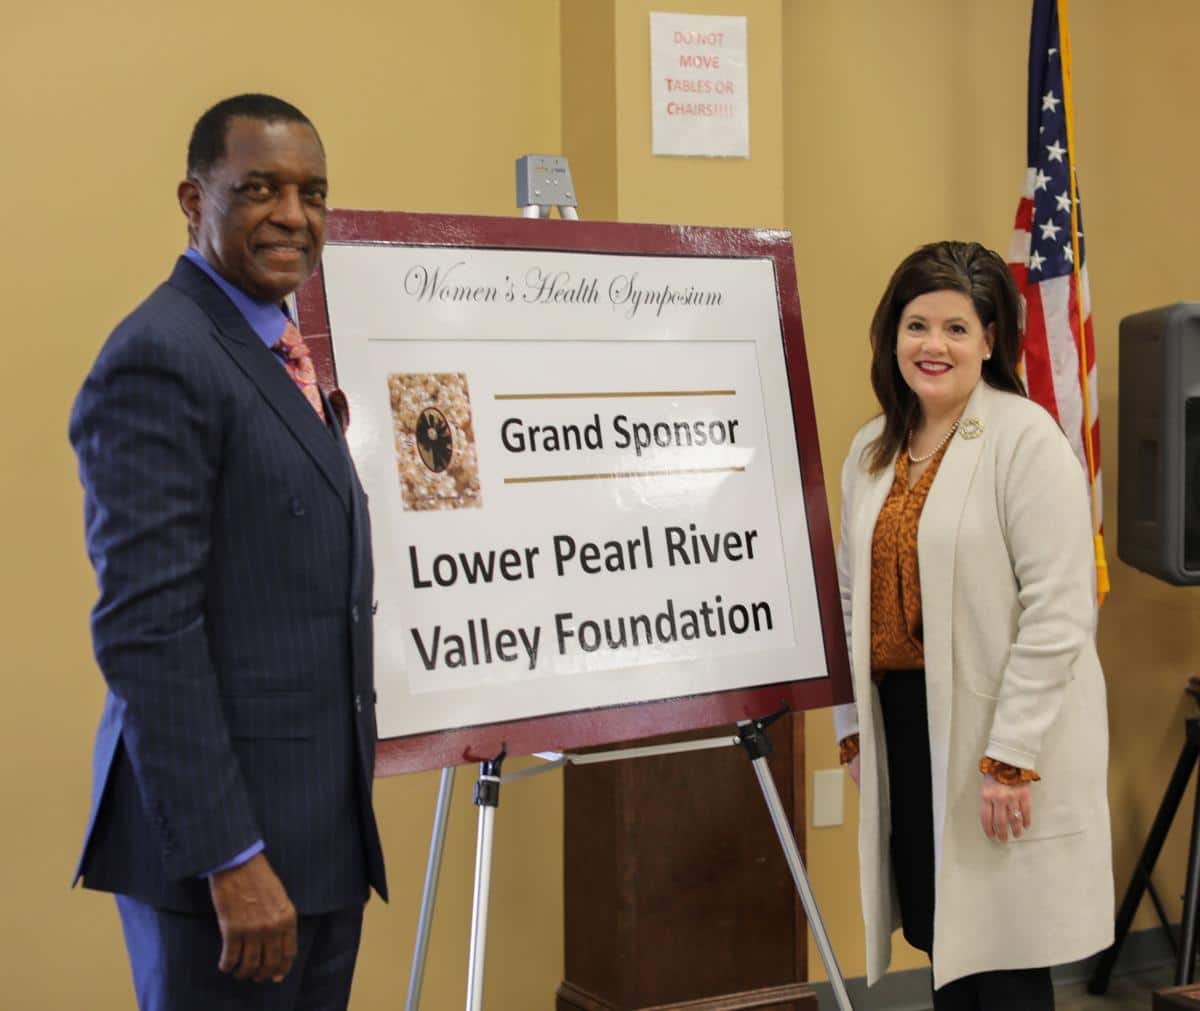 Recognizing Gold Sponsor Lower Pearl River Valley Foundation; Clyde Deese and Dr. Jennifer Seal